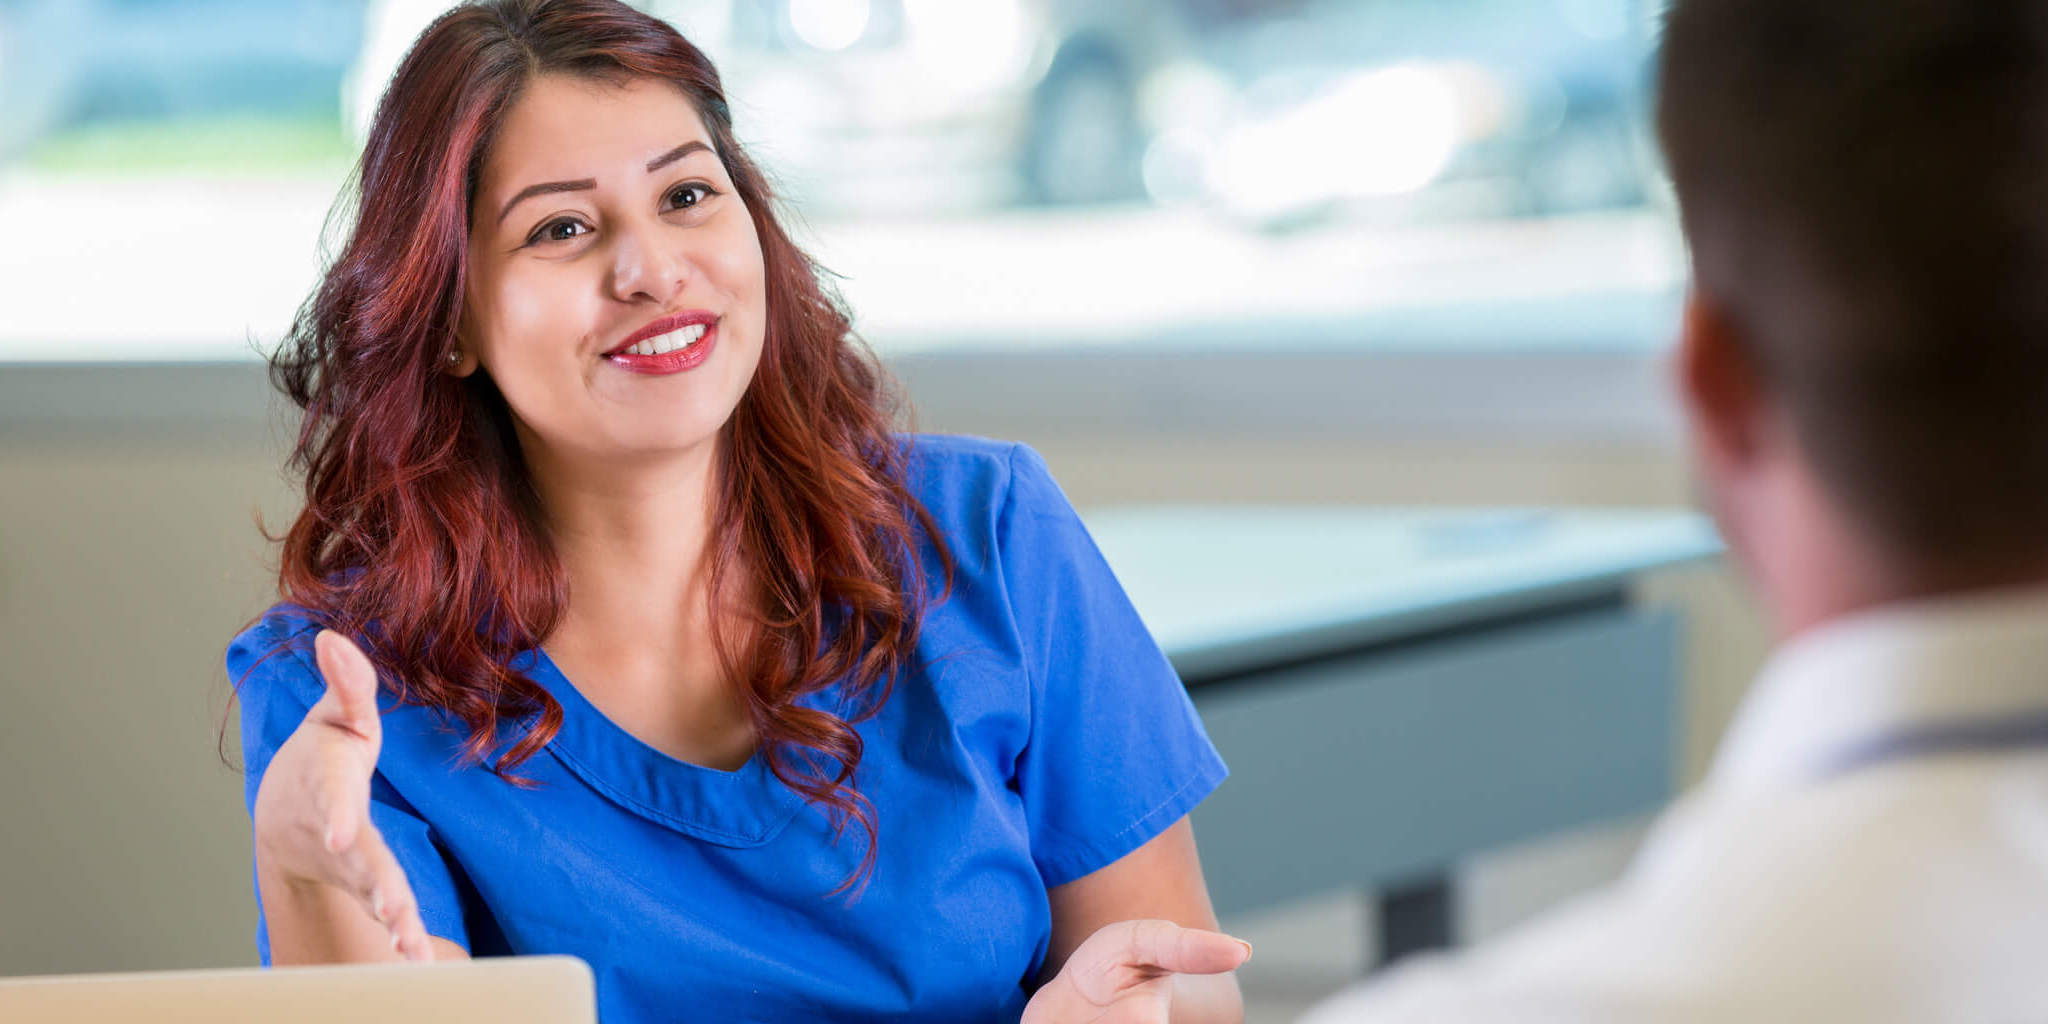 8 Nursing Programs to Boost Your Career